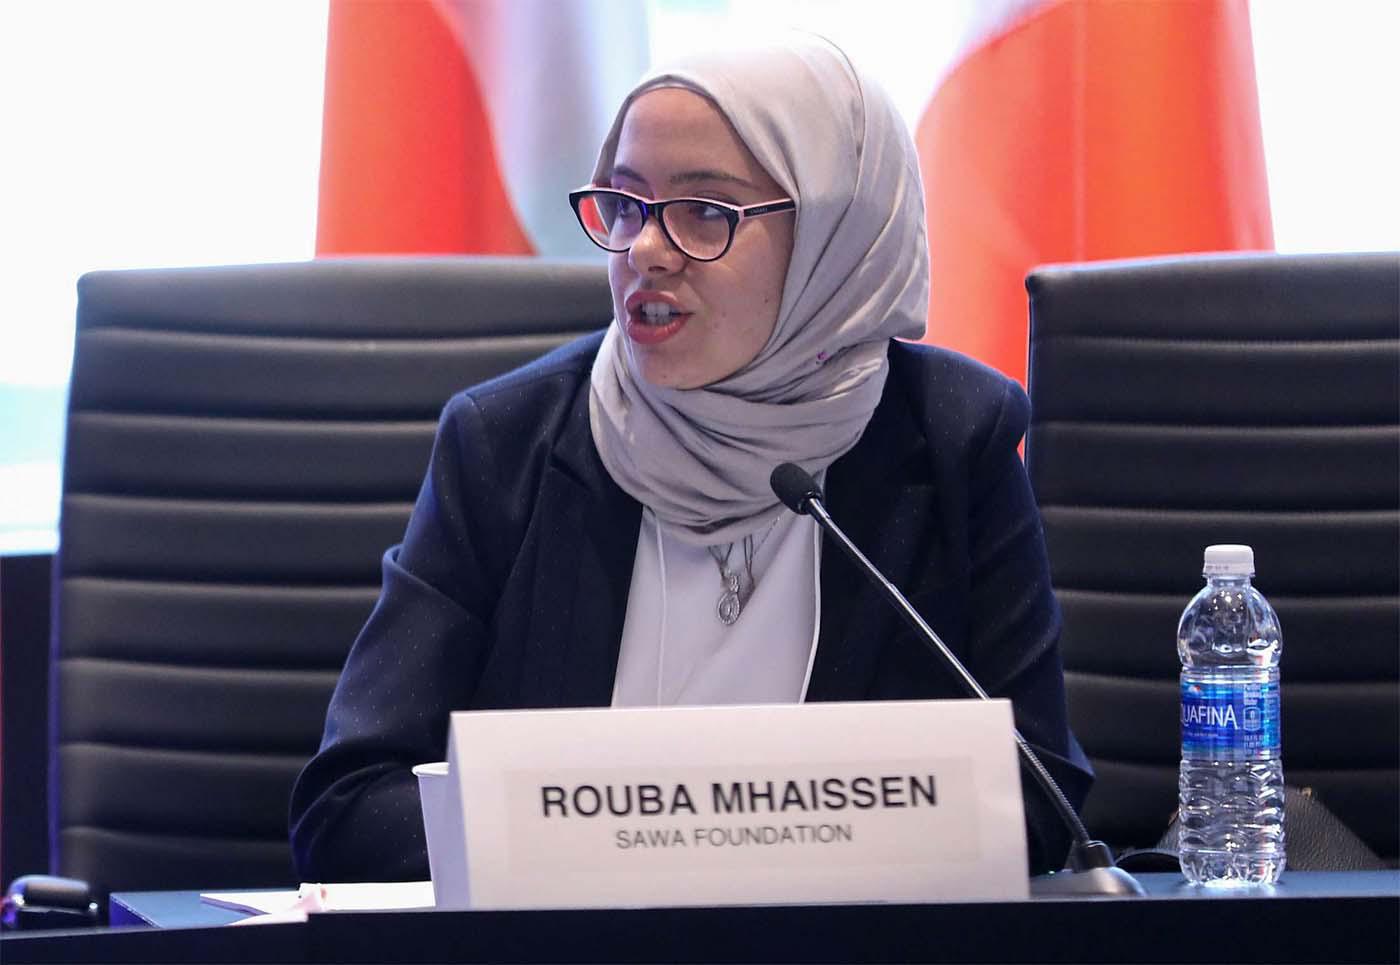 Rouba Mhaissen, champion of rights of refugees and migrants